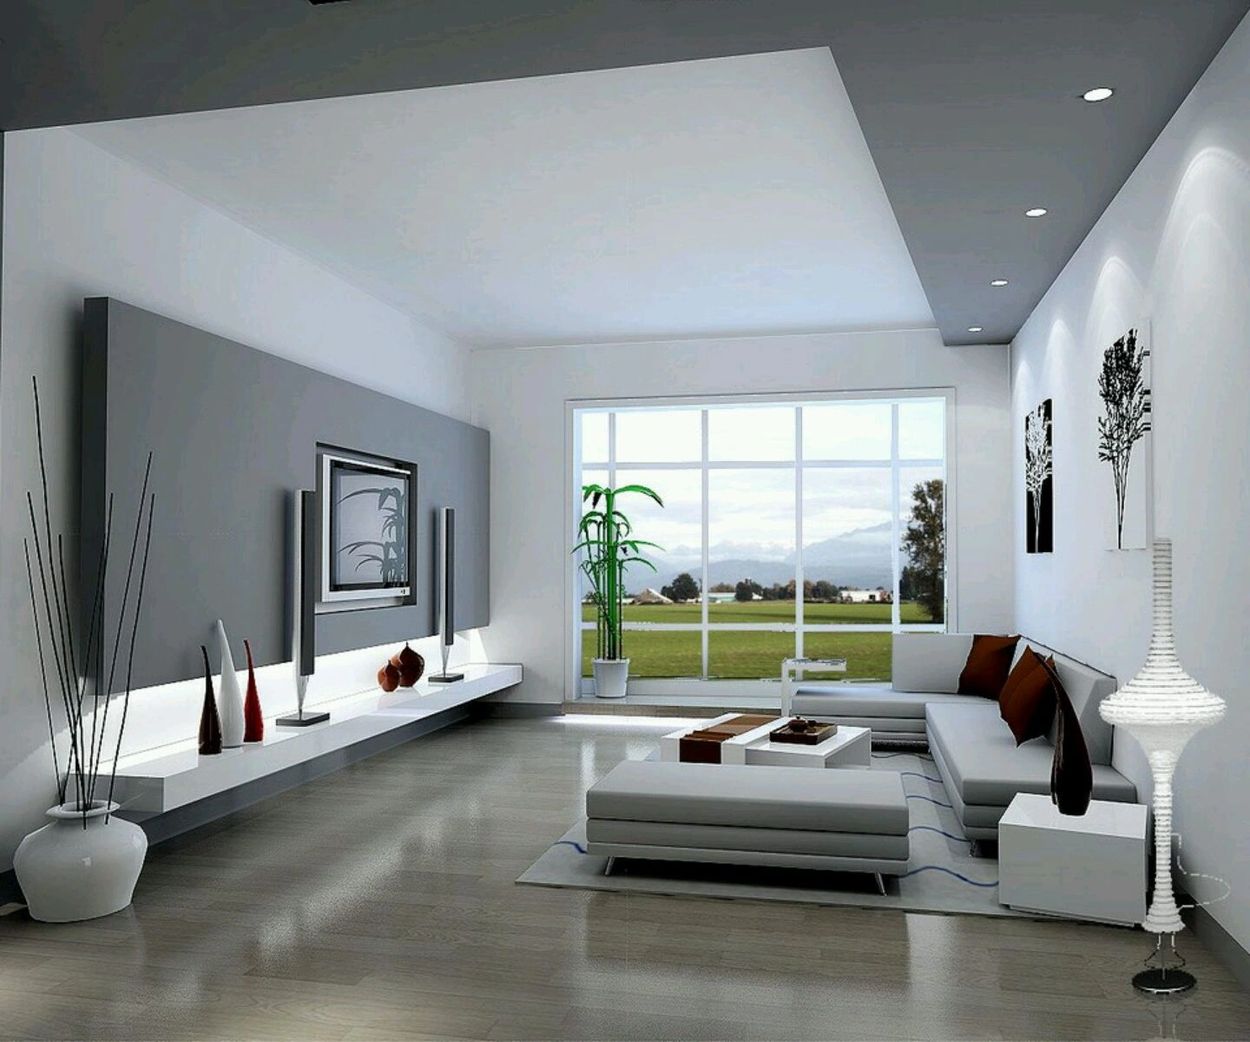 Home page. Contemporary living room, basic white with dark gray & light gray accents and amenities.